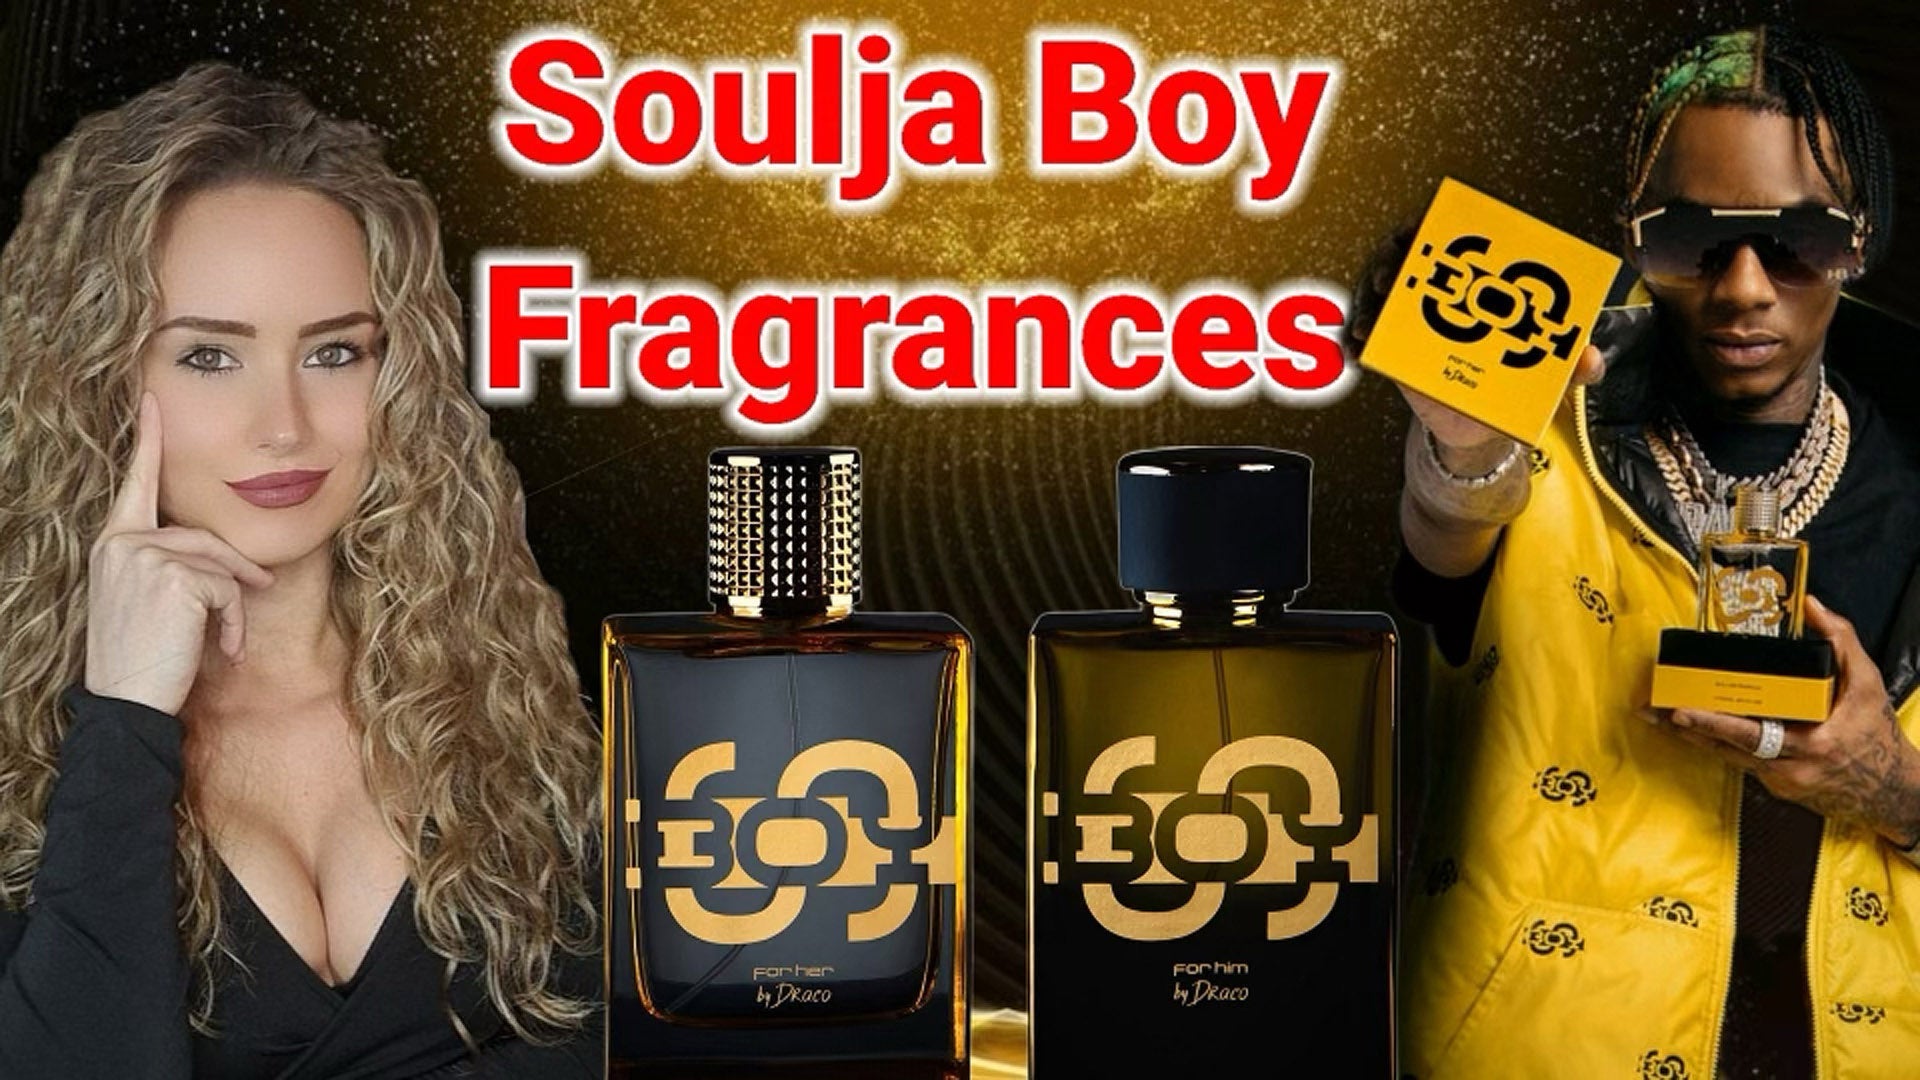 Soulja Boy fragrances SBOY By Draco are the best luxury perfumes. CurlyFragrance Approved 10/10.